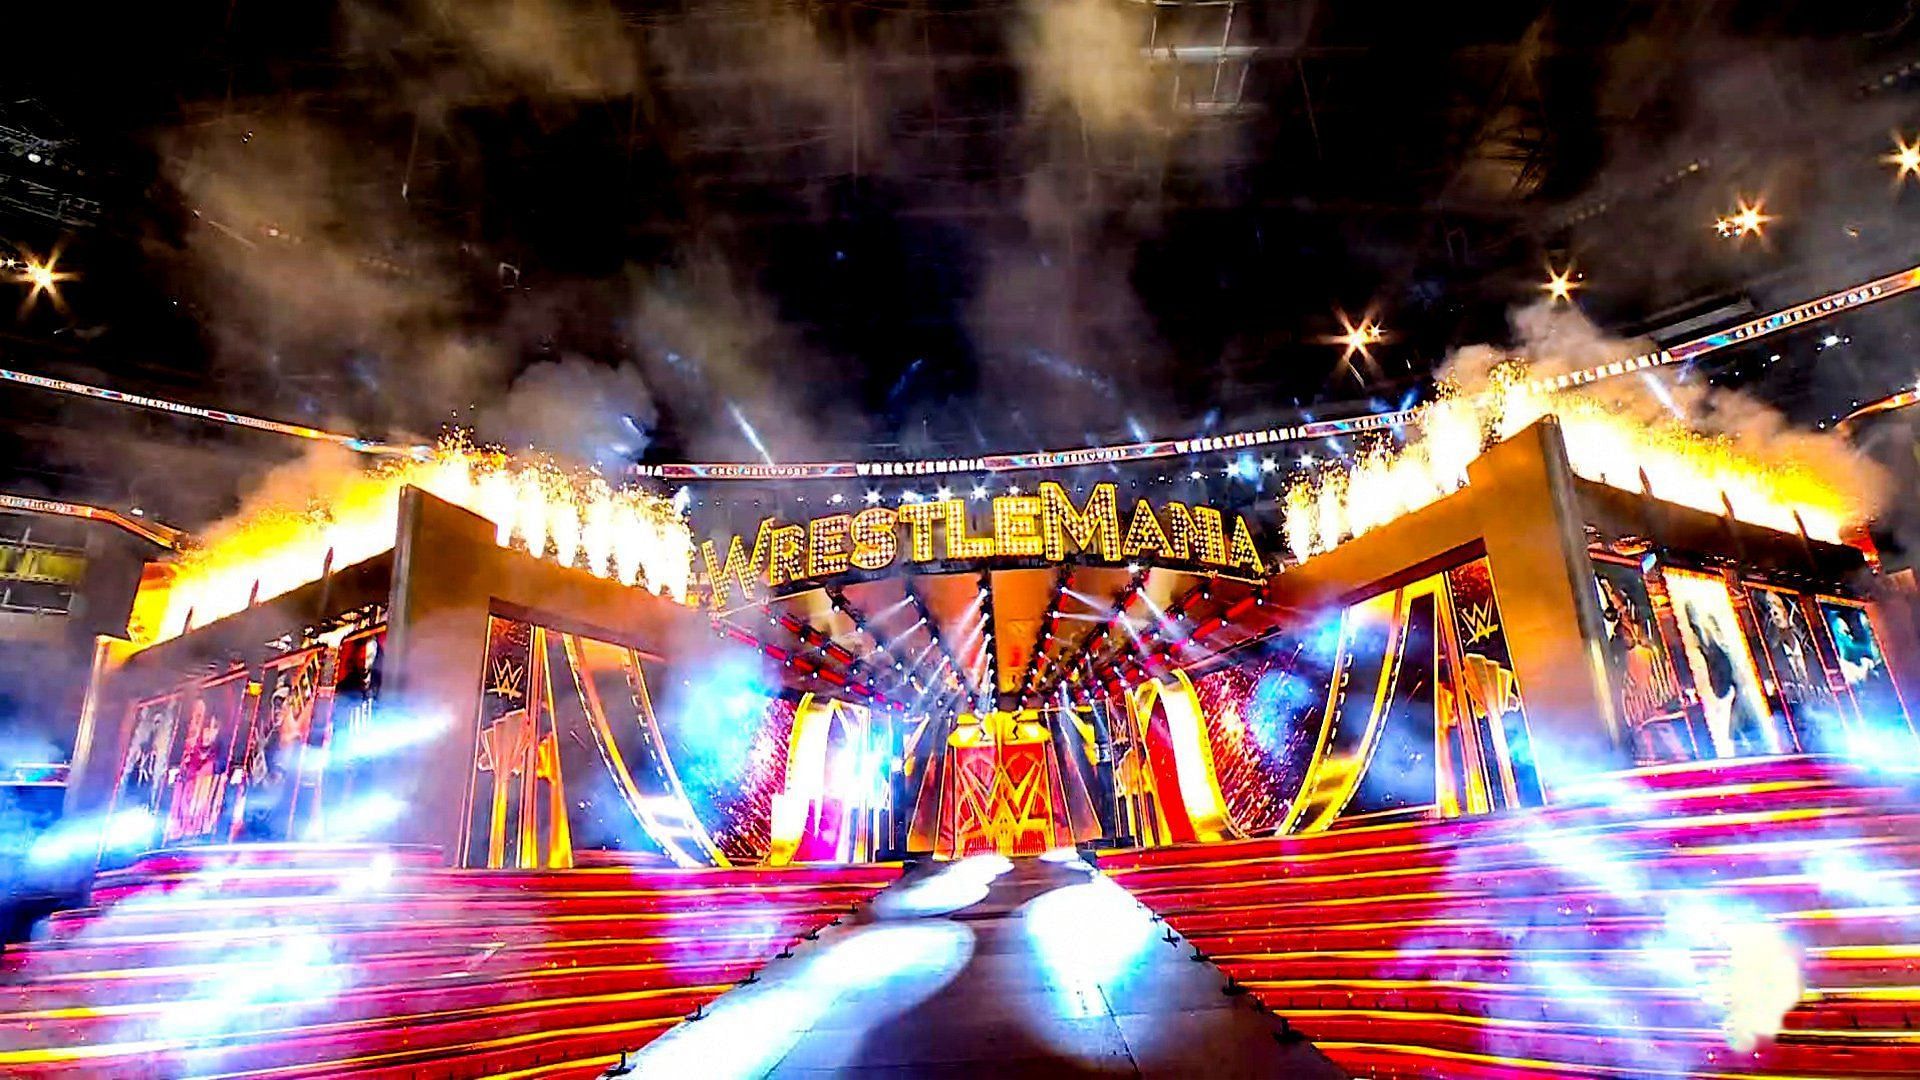 The WWE WrestleMania 39 stage at So-Fi Stadium in Hollywood